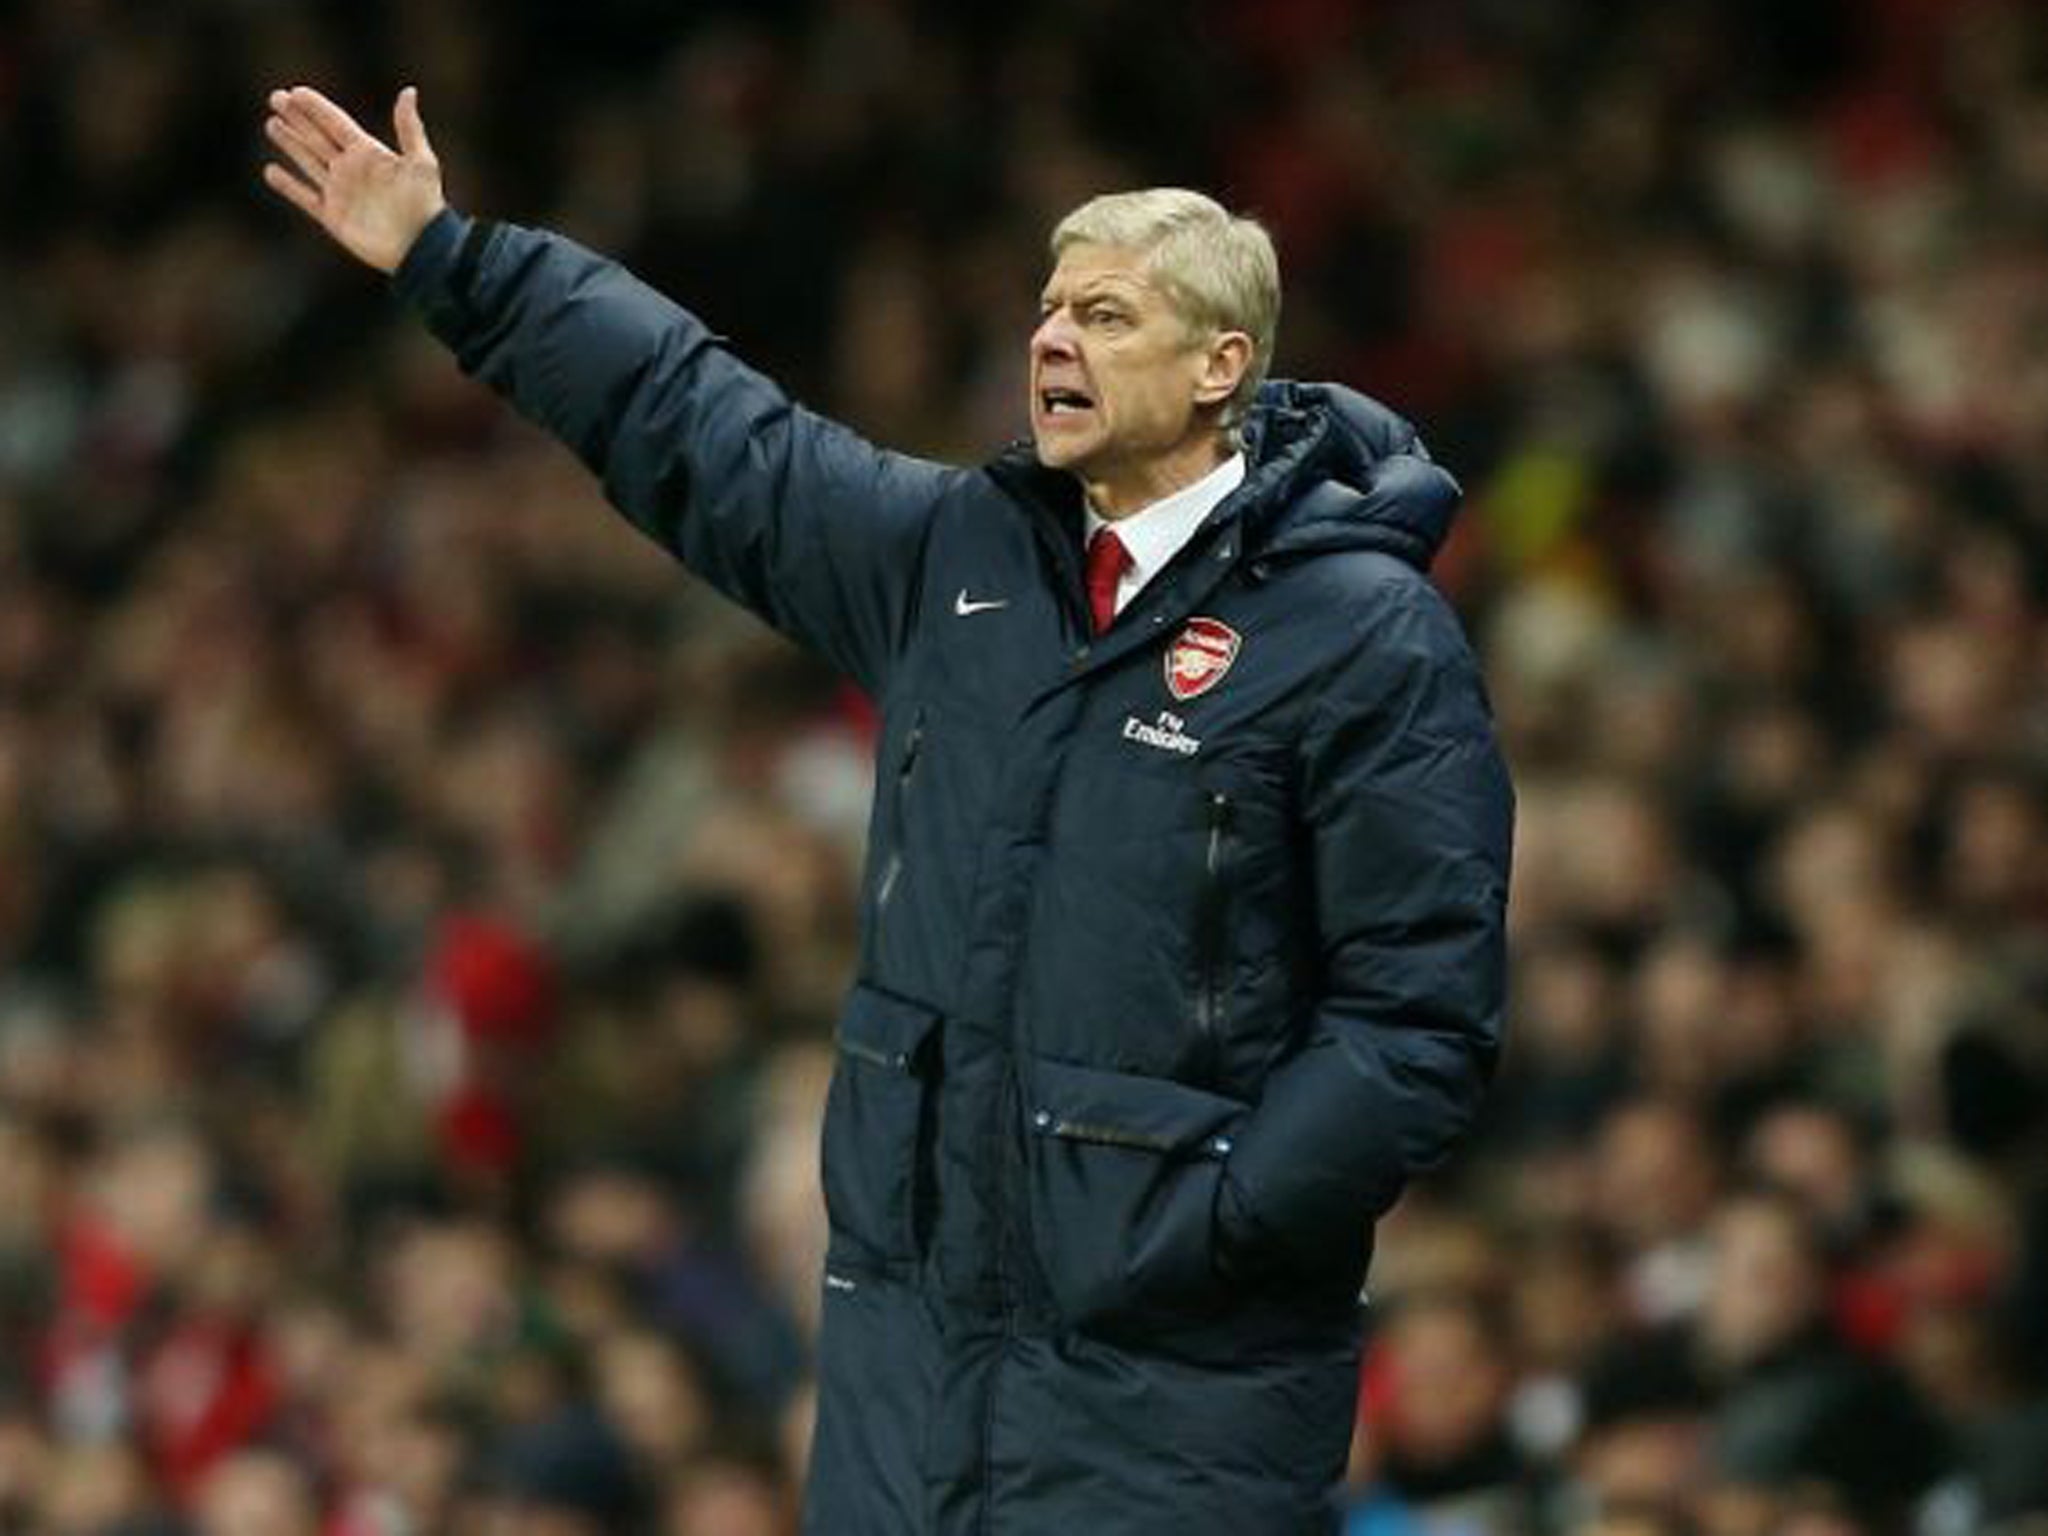 Arsene Wenger makes a gesture from the touchline